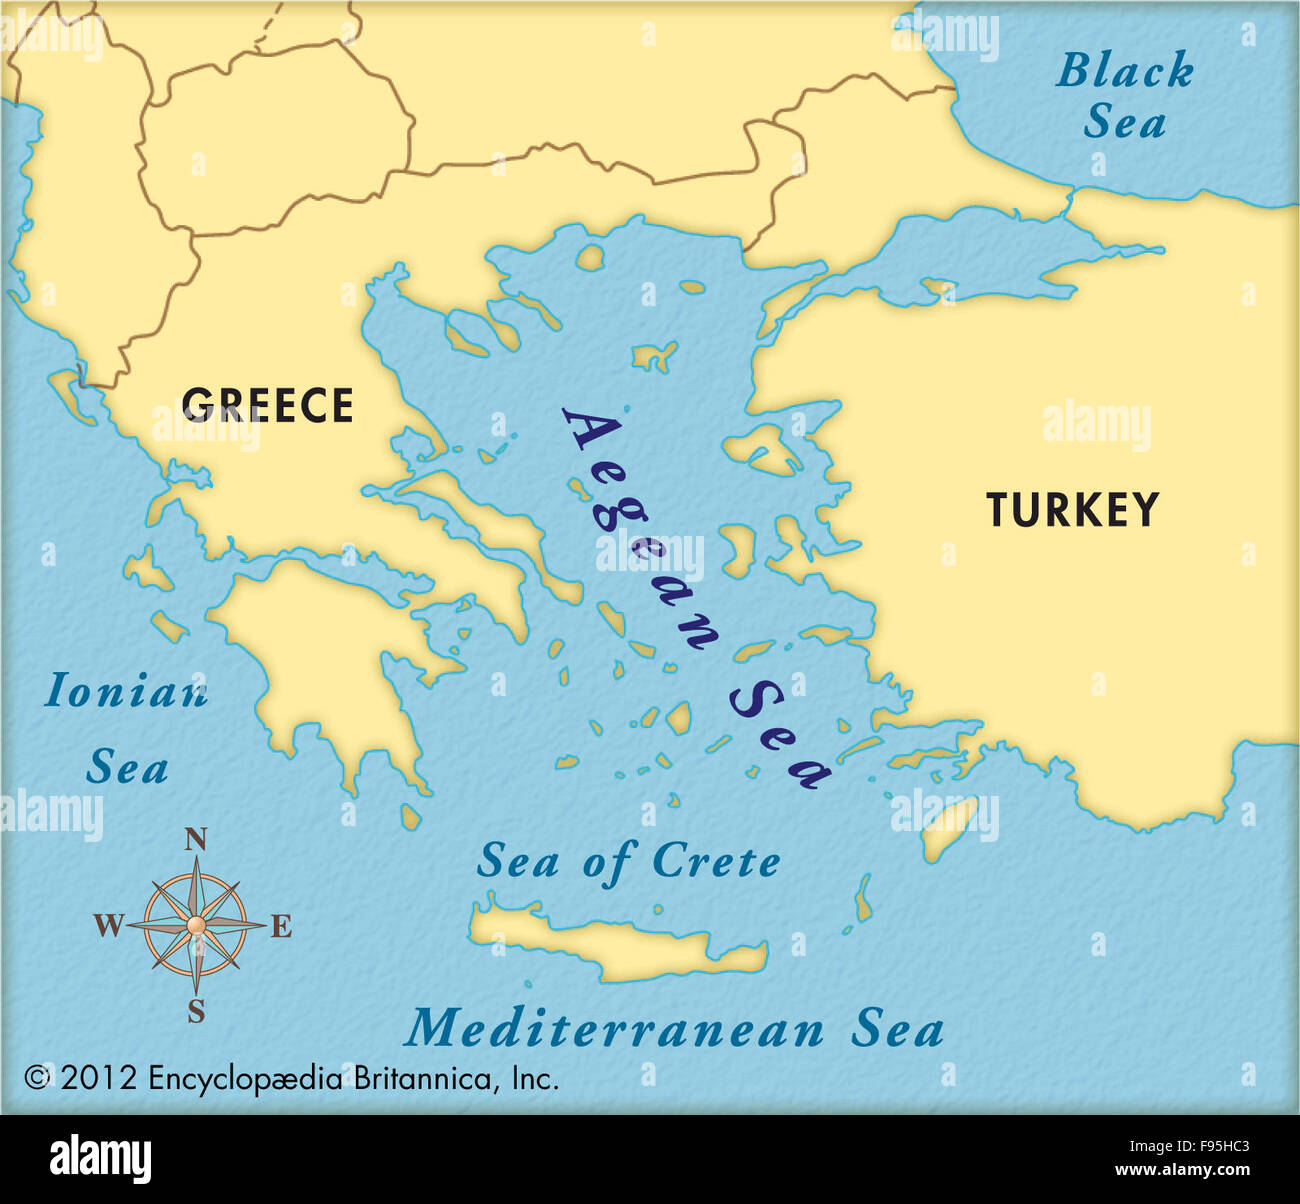 aegean sea location on world map The Aegean Sea And Surrounding Countries Stock Photo Alamy aegean sea location on world map